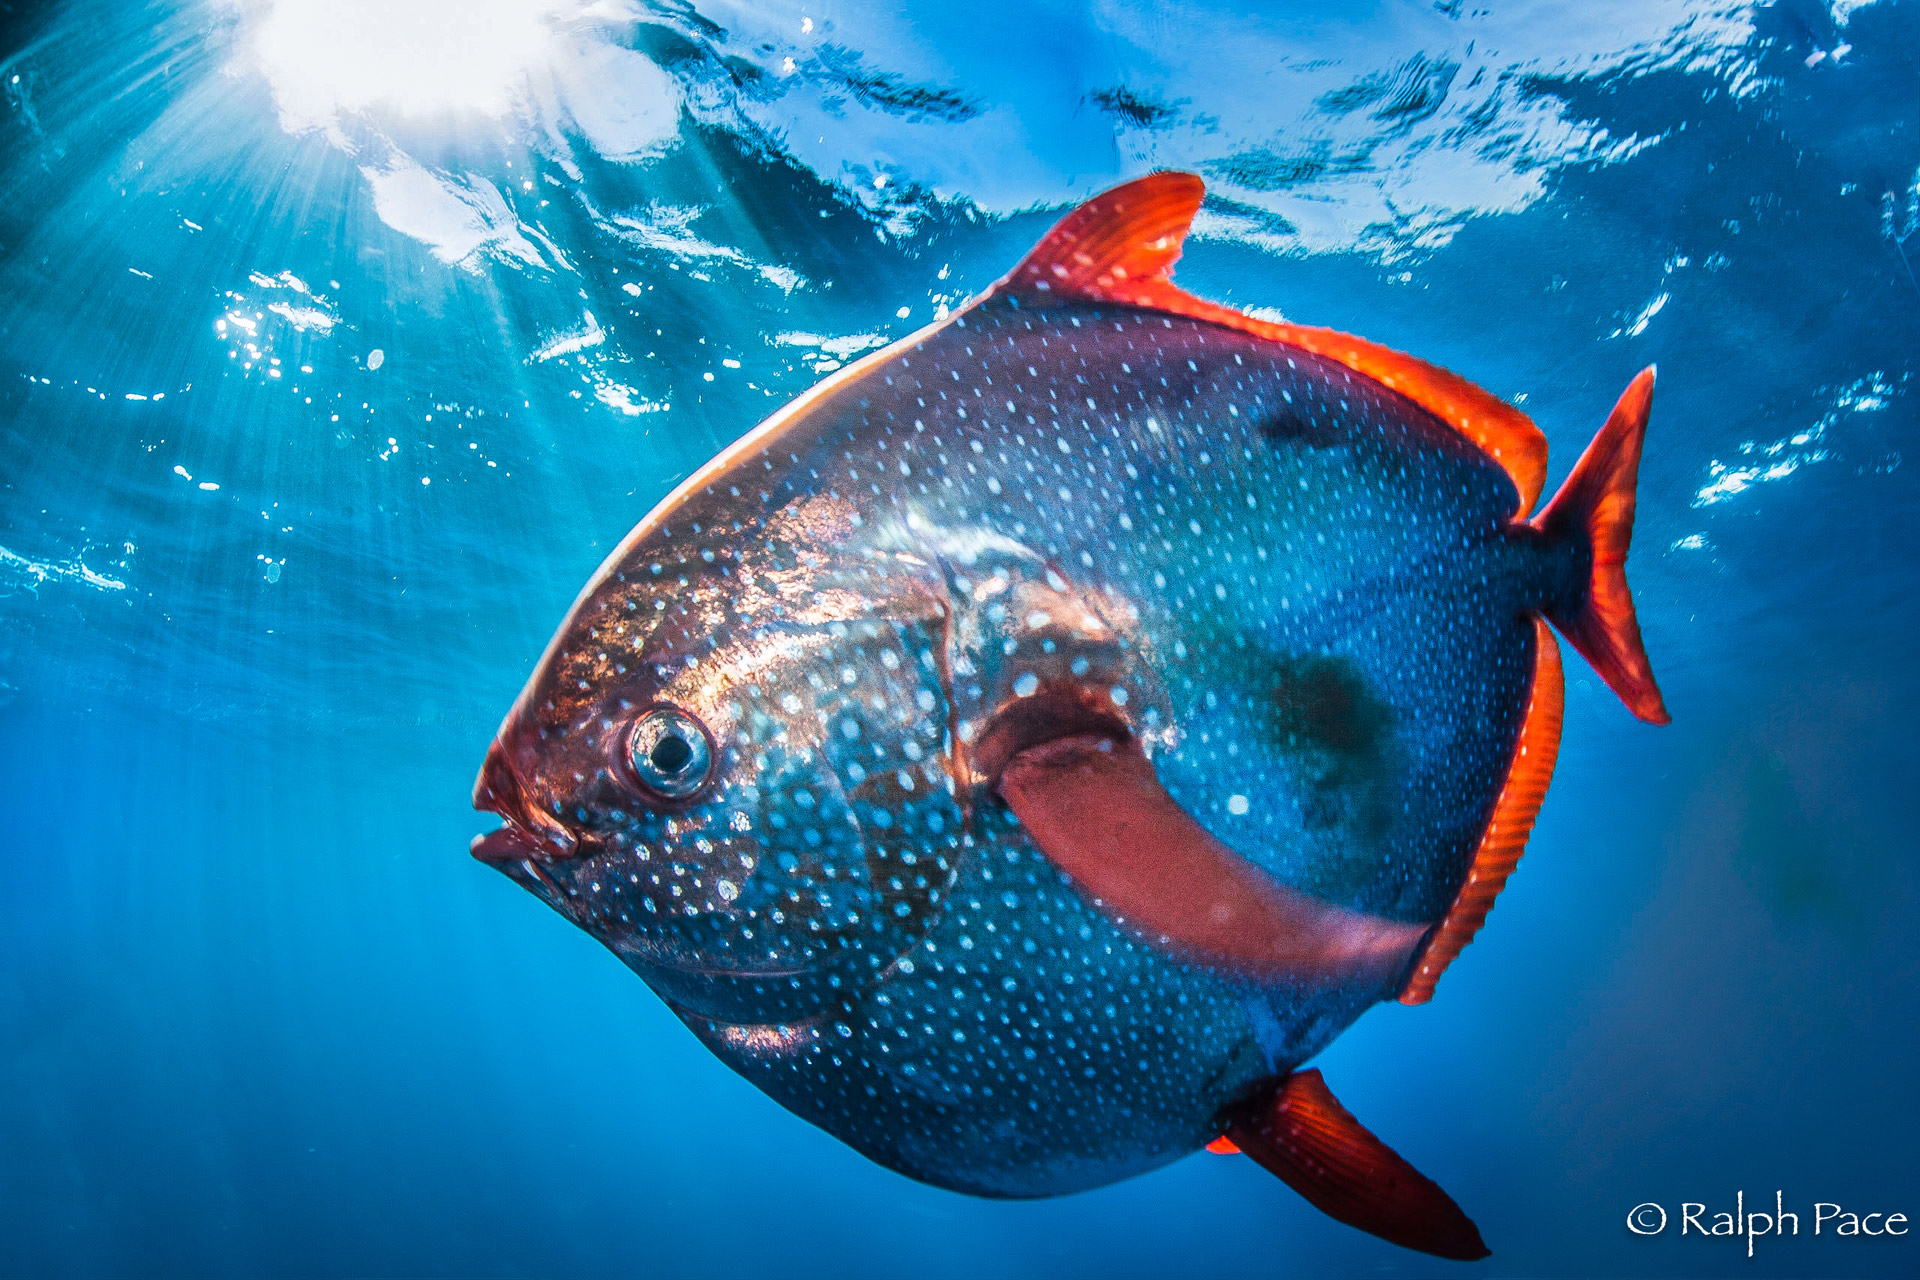 Opah - The First Fully Warm-Blooded Fish